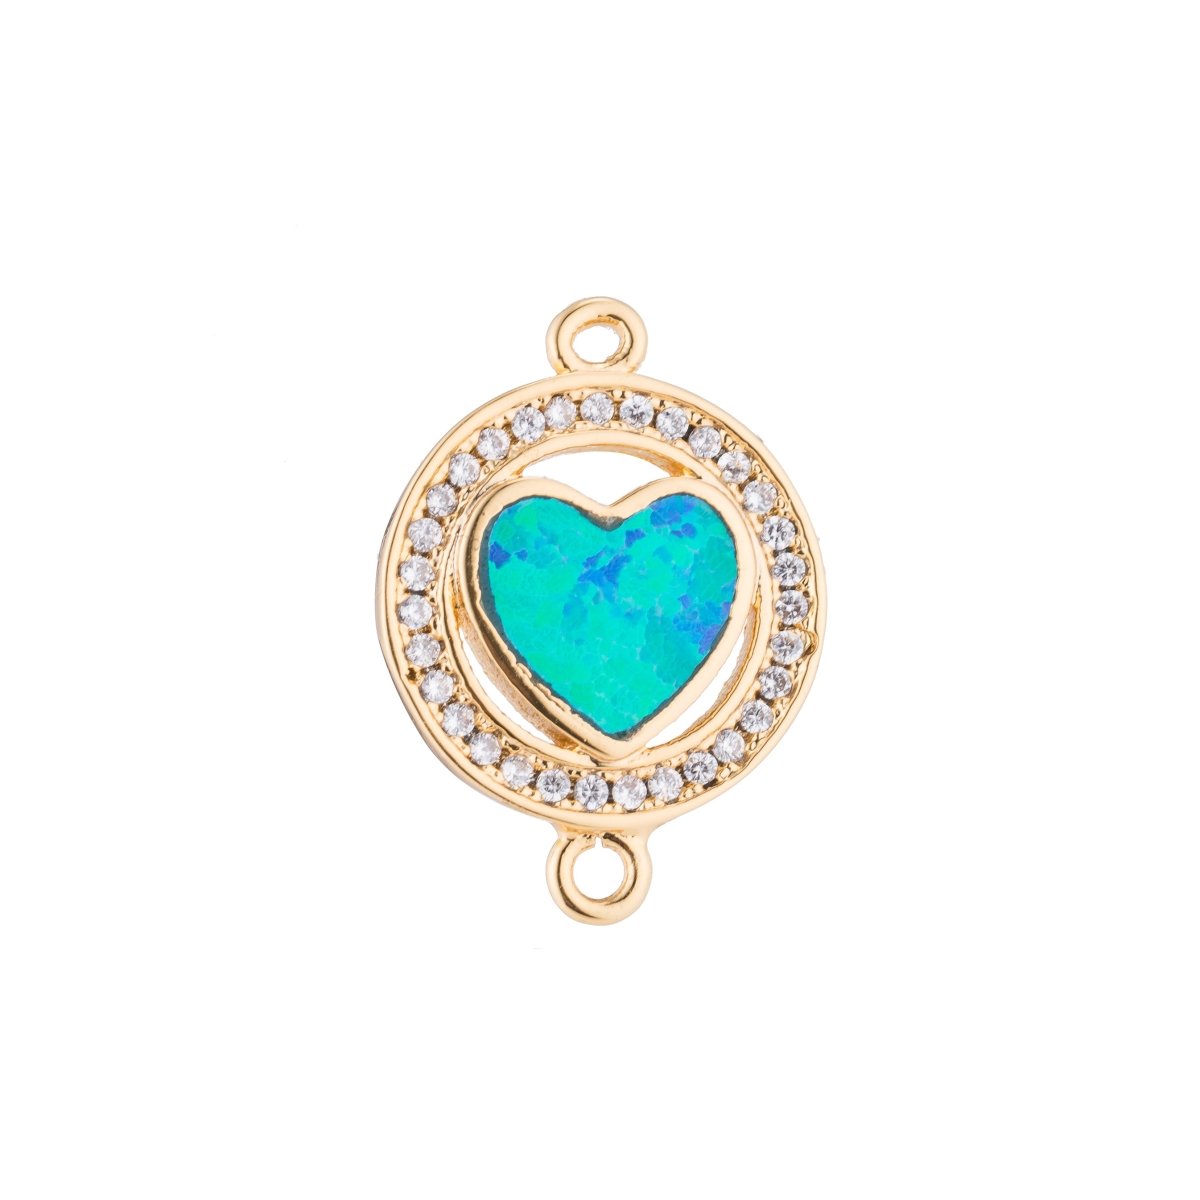 Silver, Gold, Black Gold Heart with Green/Blue Opal, Circle of Love, Cubic Zirconia Bracelet Charm Bead Finding CONNECTOR For Jewelry Making | F-125 - DLUXCA